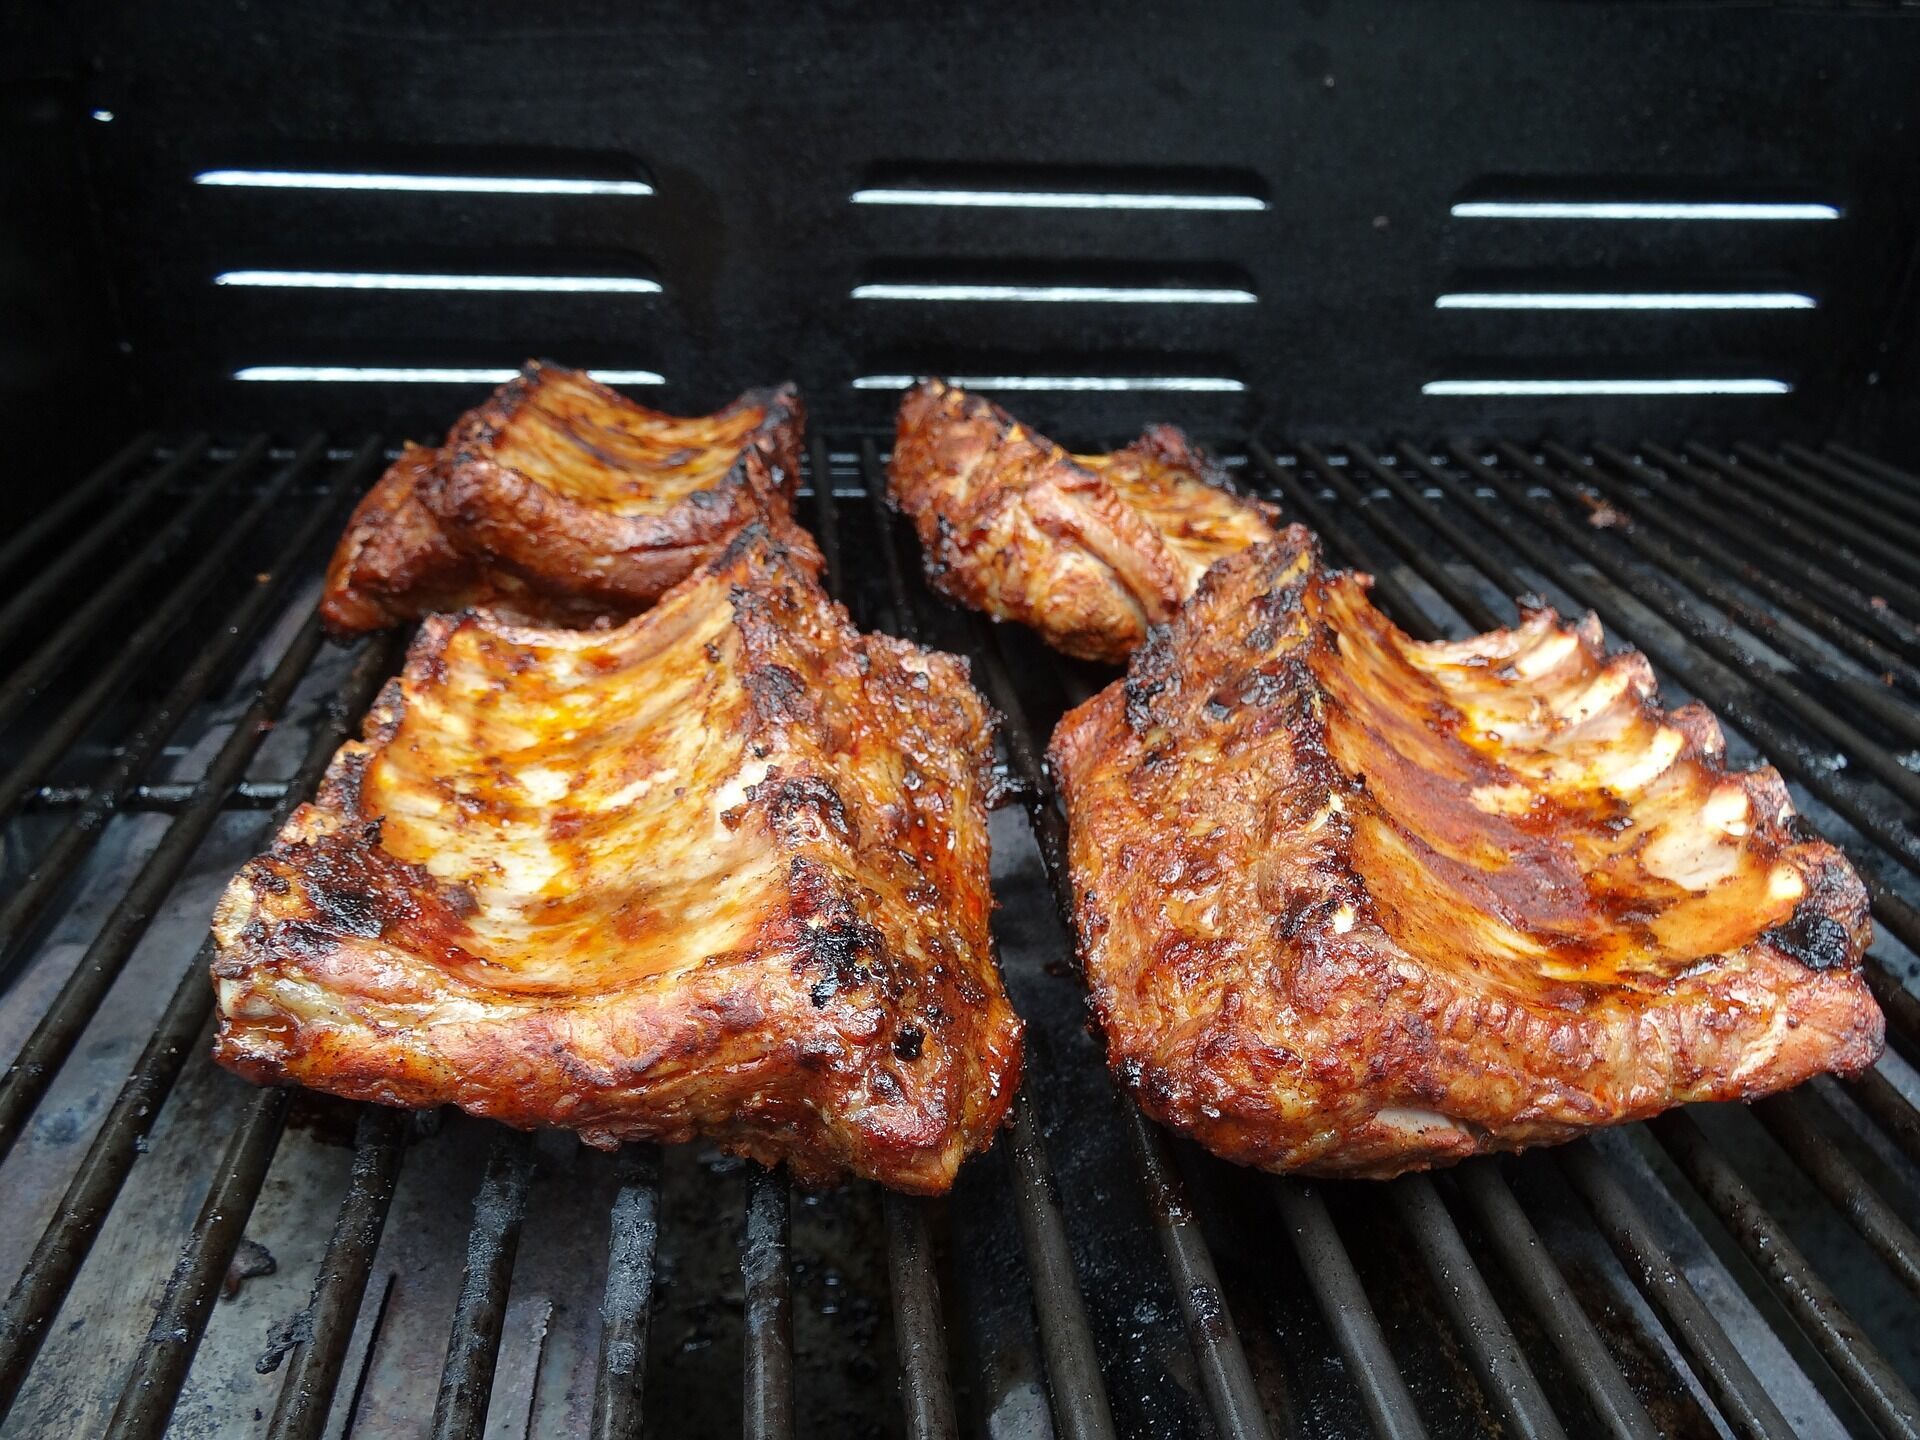 How to cook ribs deliciously